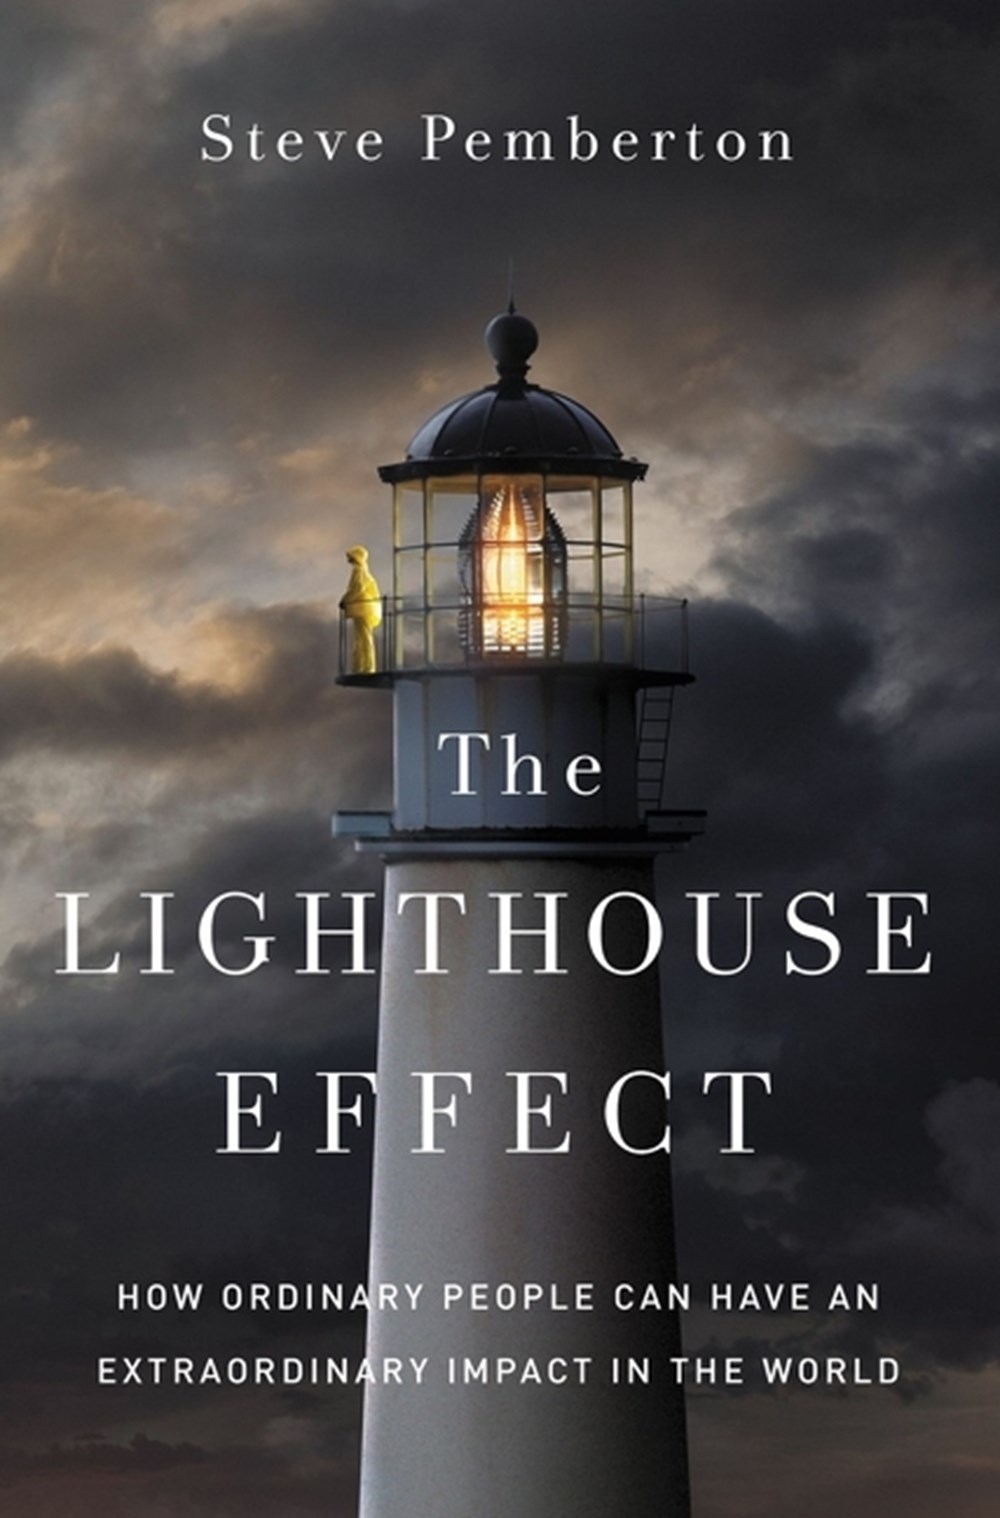 Lighthouse Effect How Ordinary People Can Have an Extraordinary Impact in the World